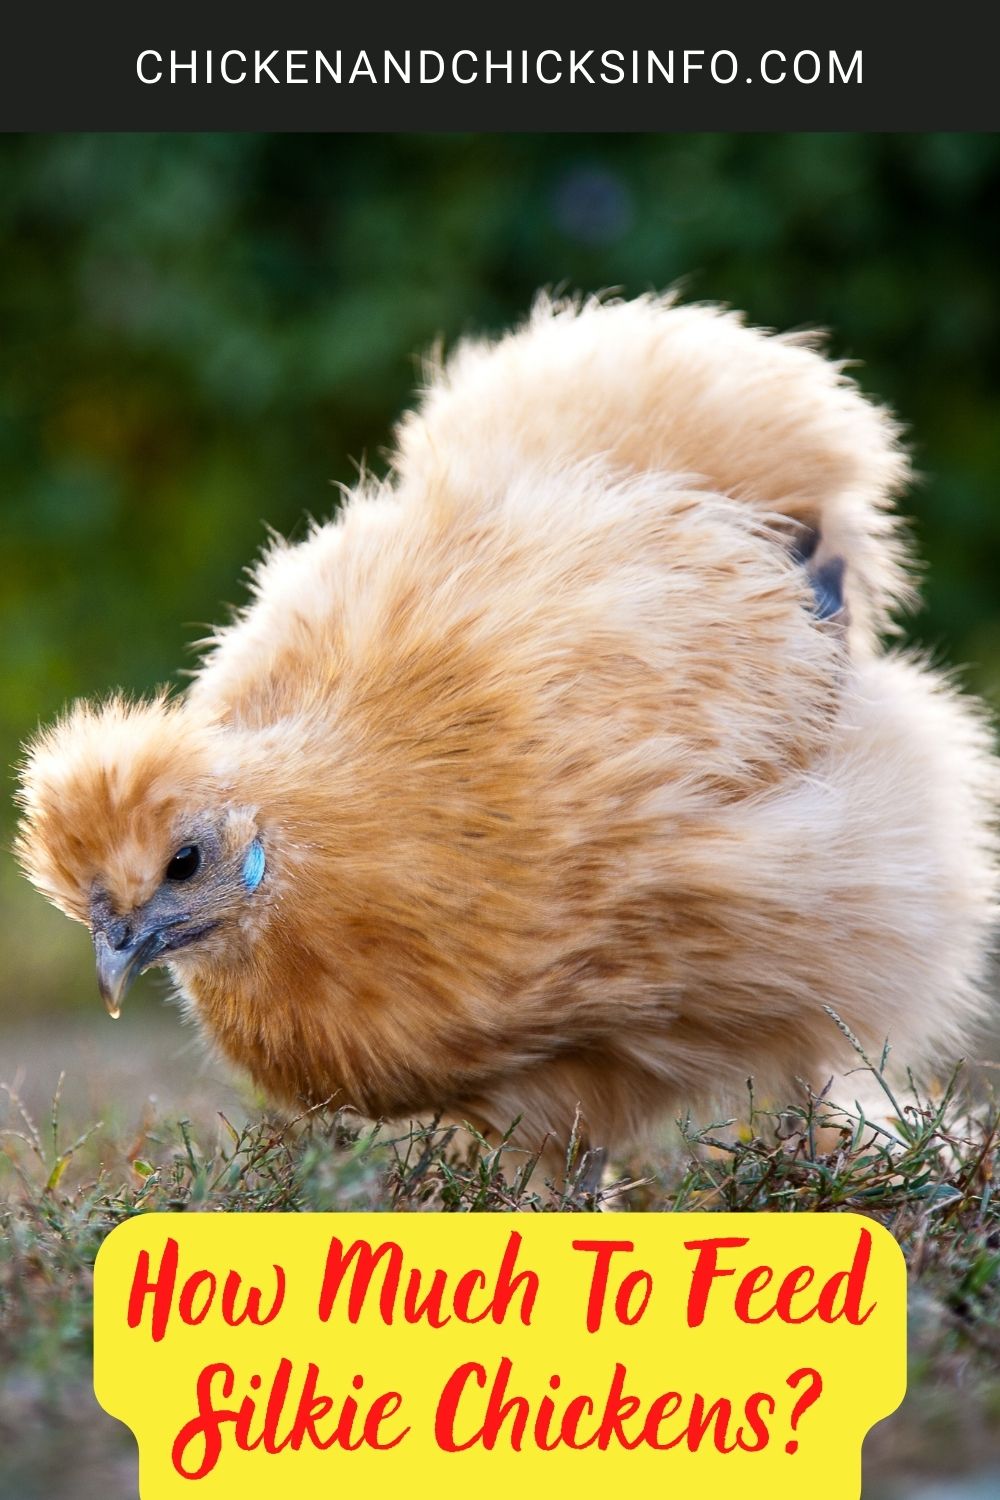 How Much To Feed Silkie Chickens? poster.
